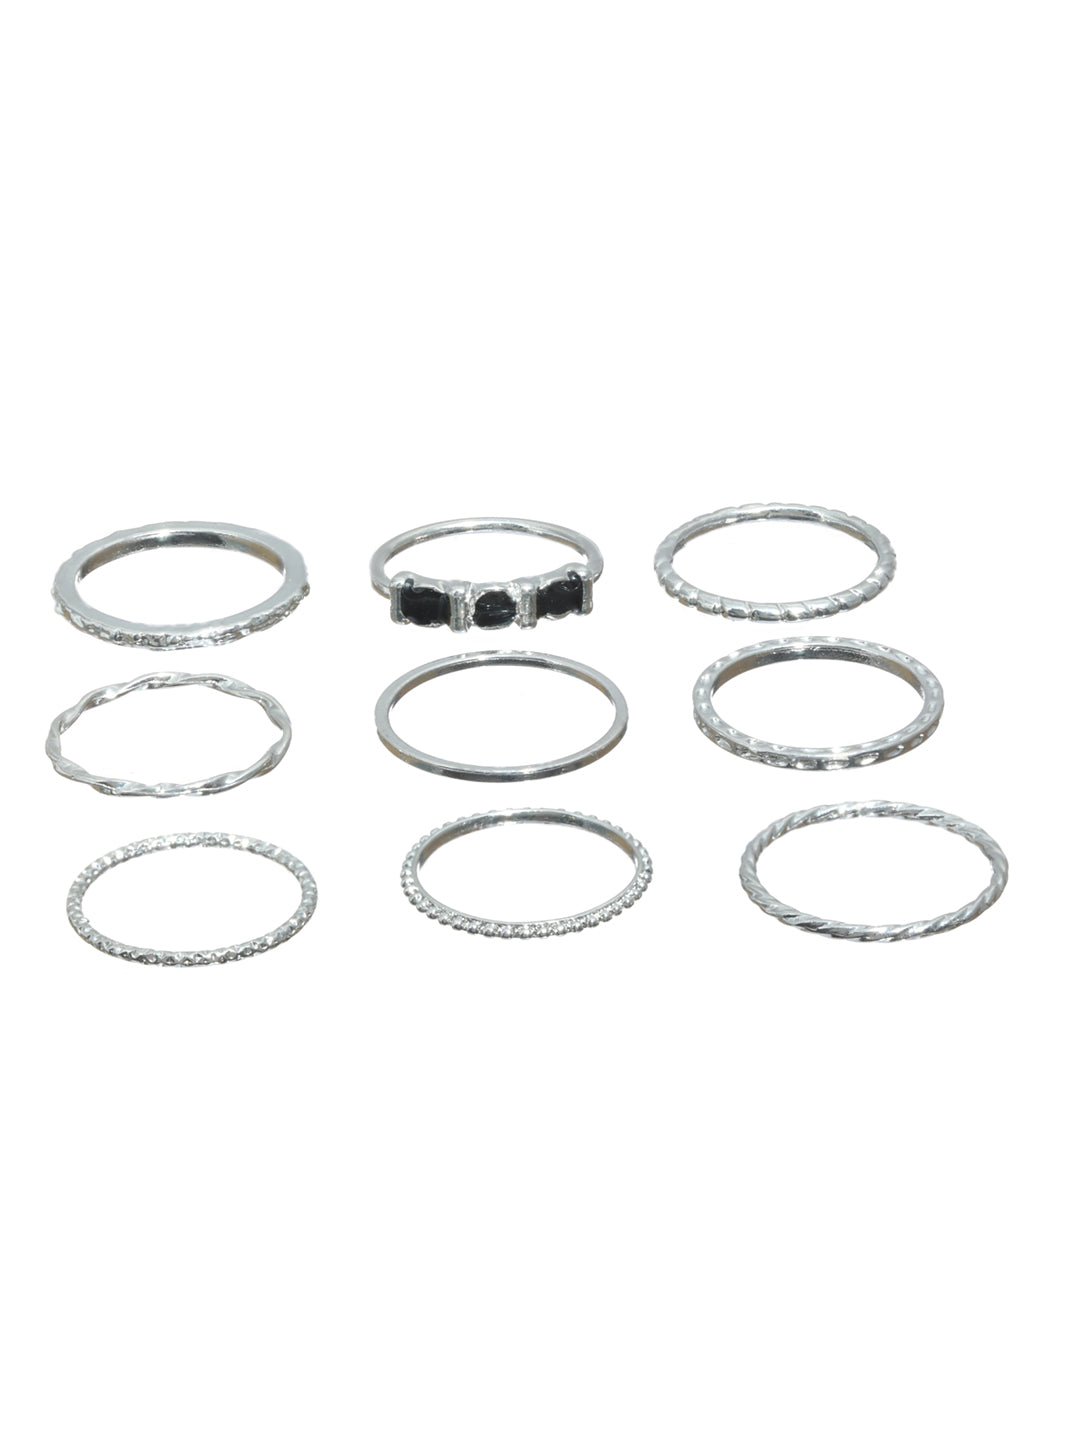 Prita Fashionable Silver Plated Ring Set of 9